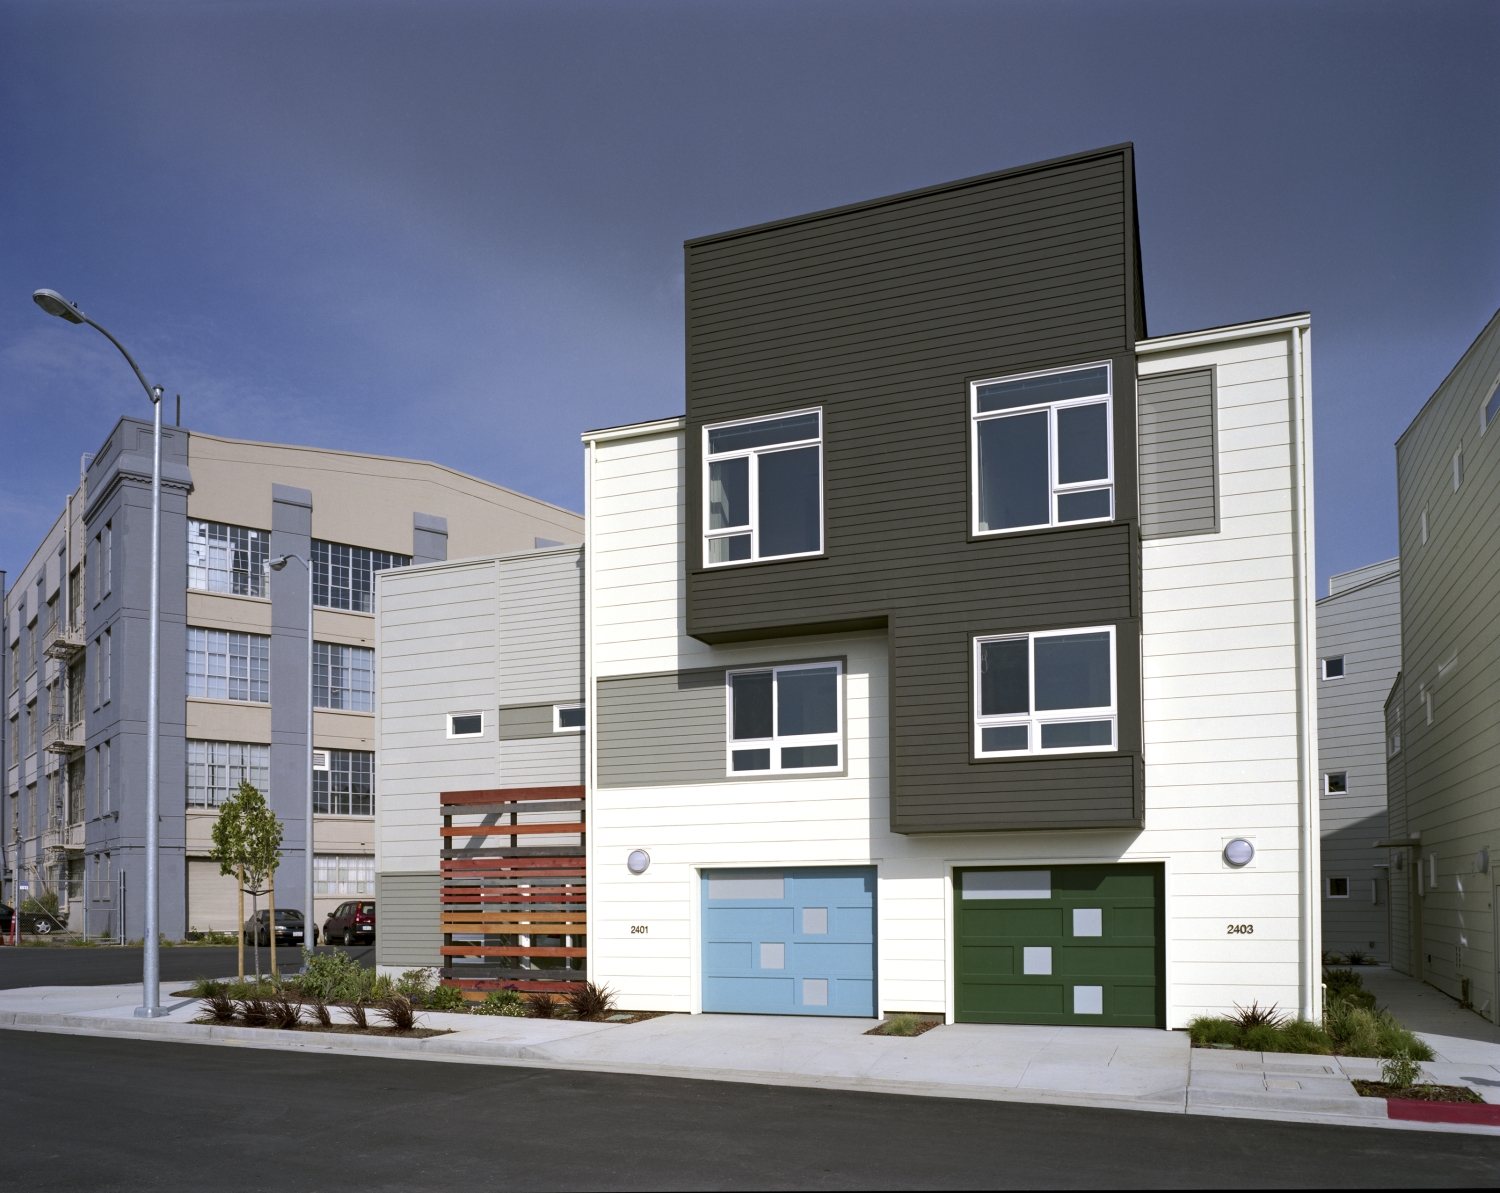 Duplex townhome at Armstrong Place in San Francisco.